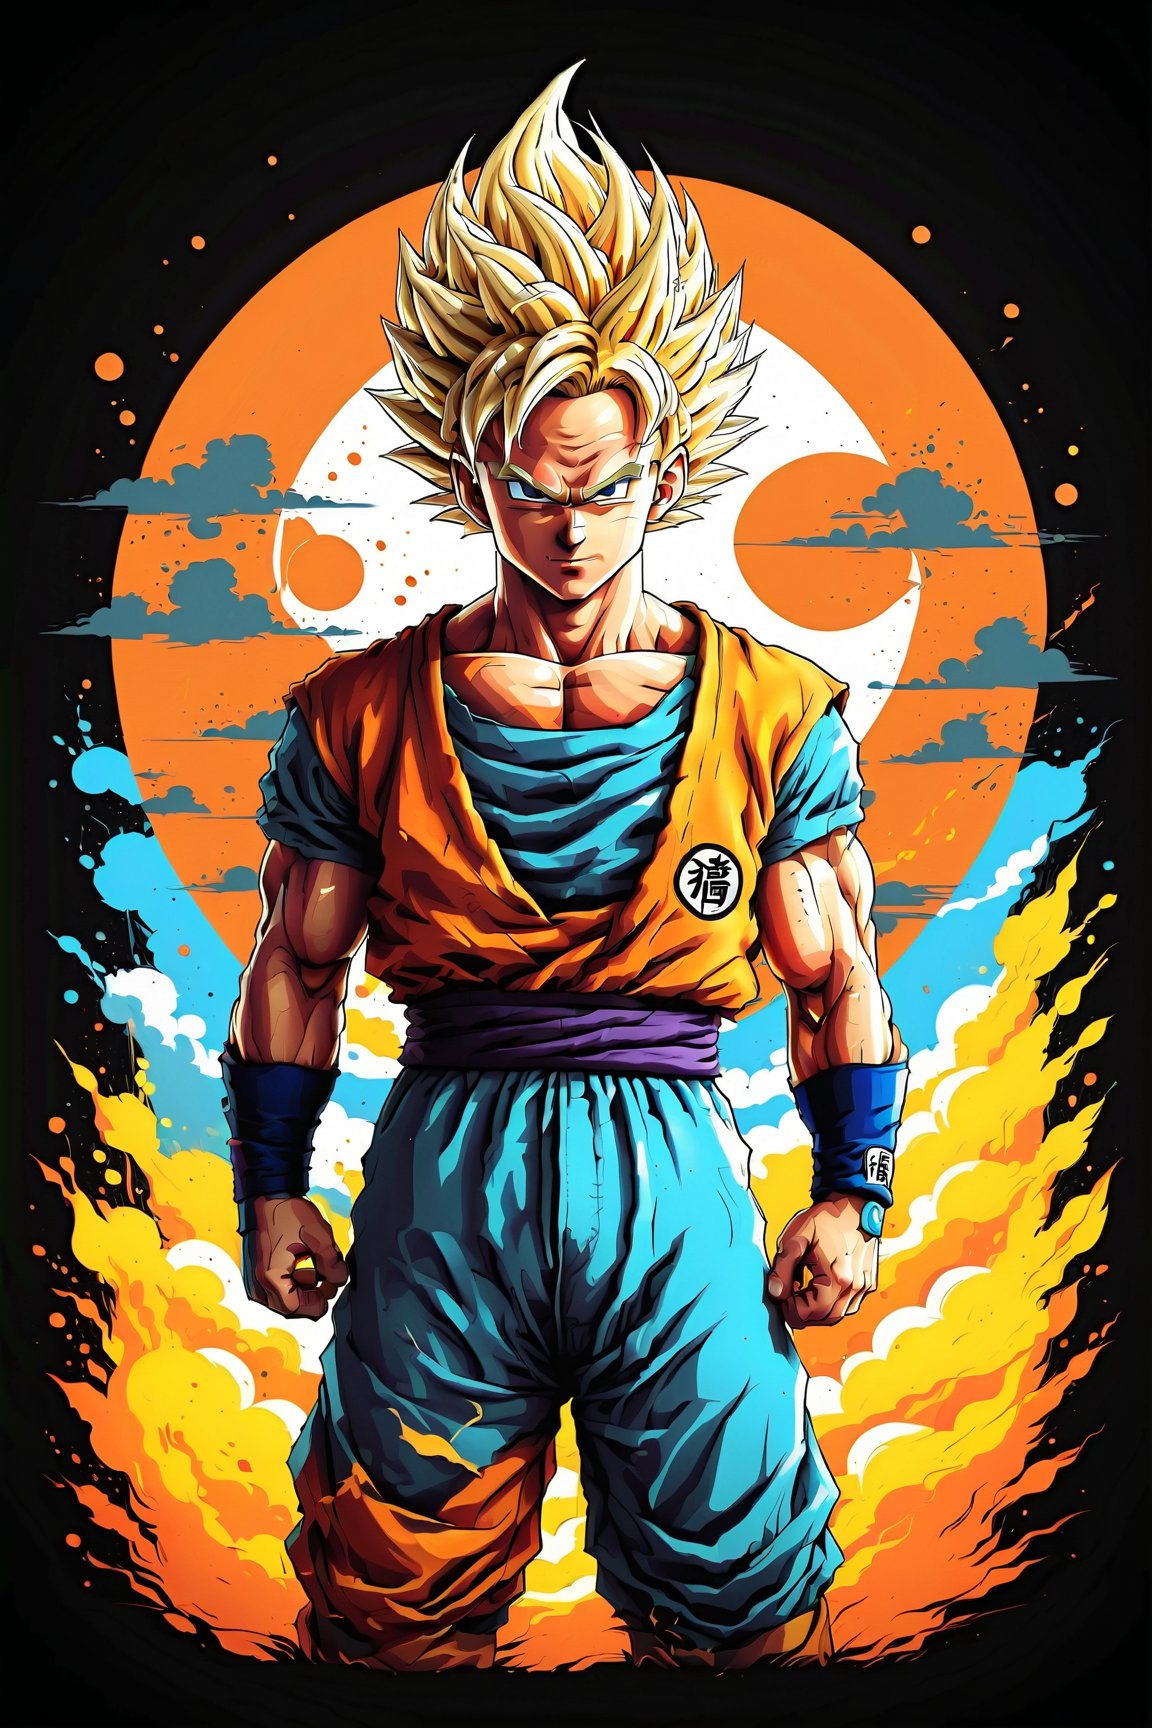 anime style illustration of Dragon ball, detailed design and urban style t-shirt design, solid color background, pro vector, 4K resolution

